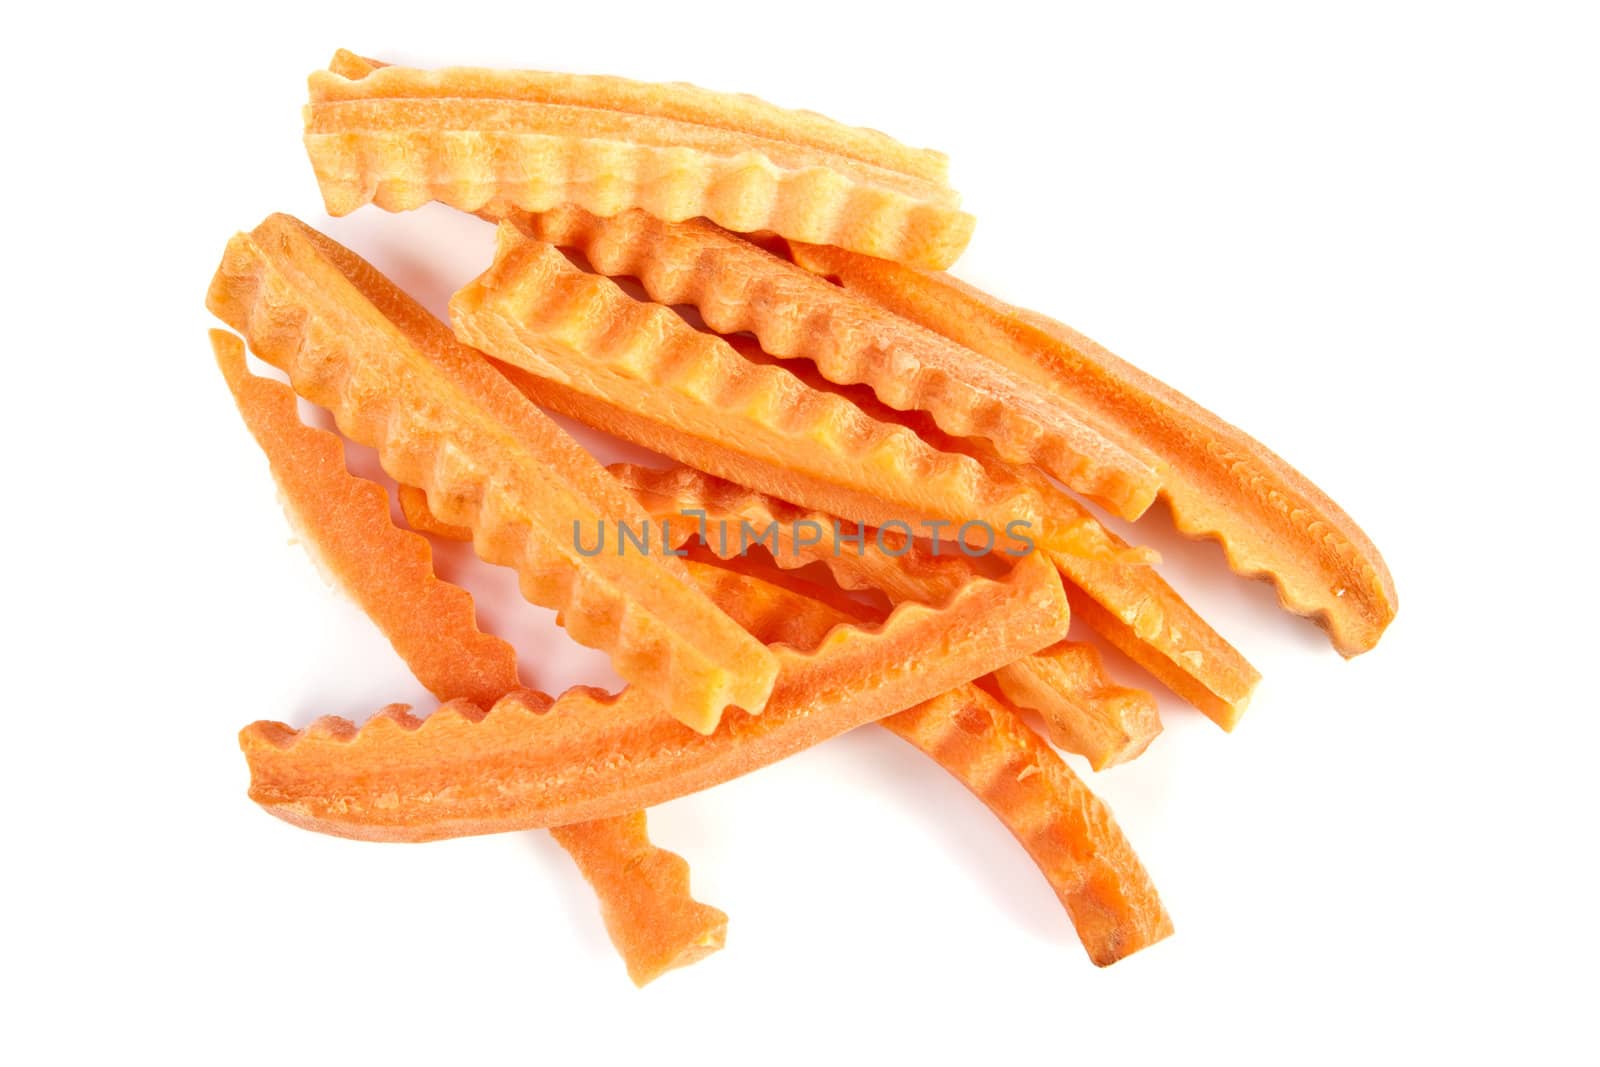 Portion of carrots, spiced carrot Long slices